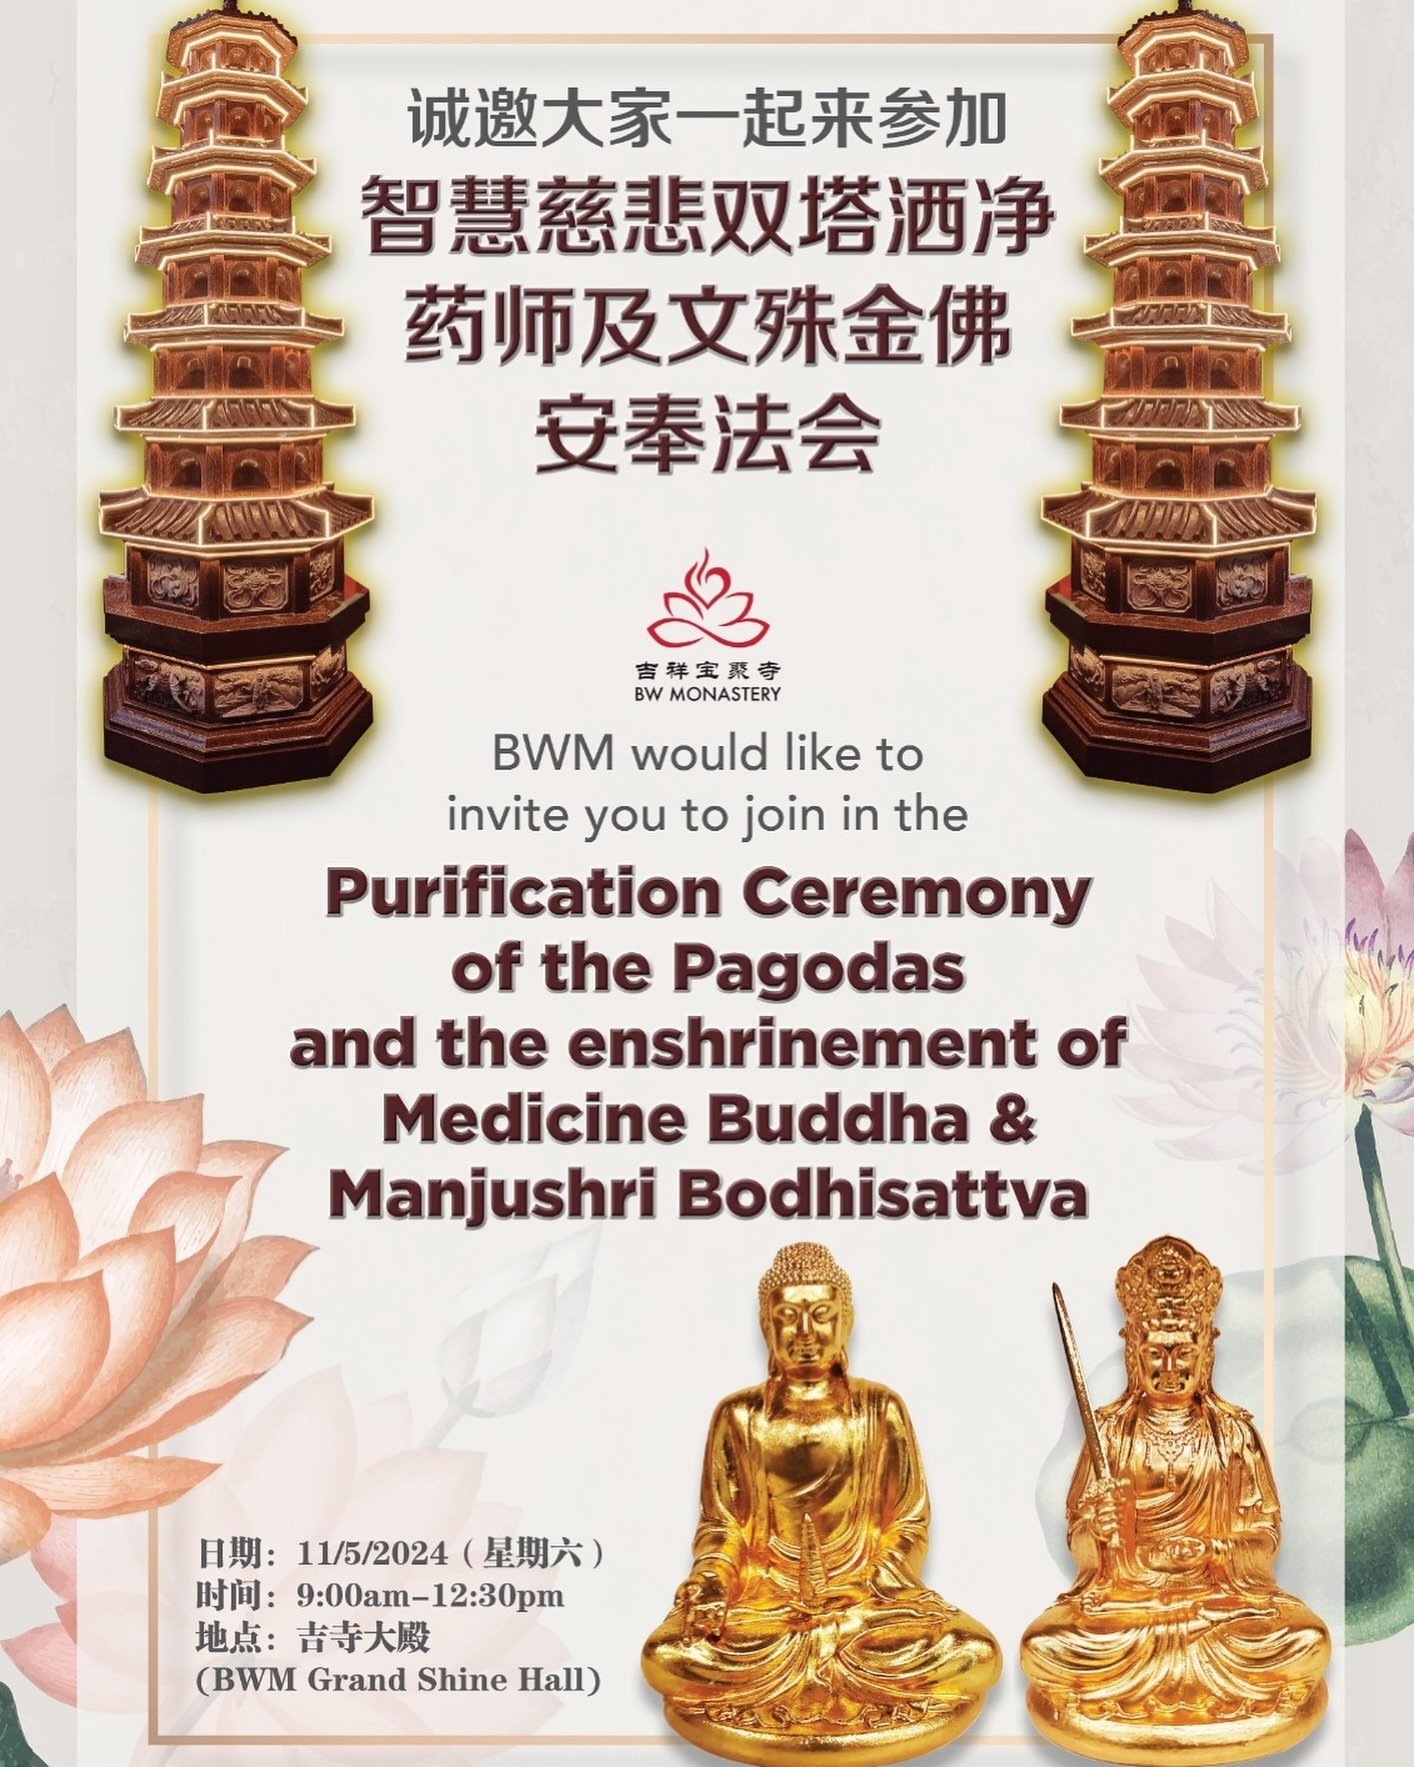 According to literature on Buddhist precepts, reverently building and honoring pagodas respectfully has immeasurably more merit than giving hundreds and thousands of quintals of gold. 🏯✨

Join us this Saturday (11/5) morning as we purify our new pag